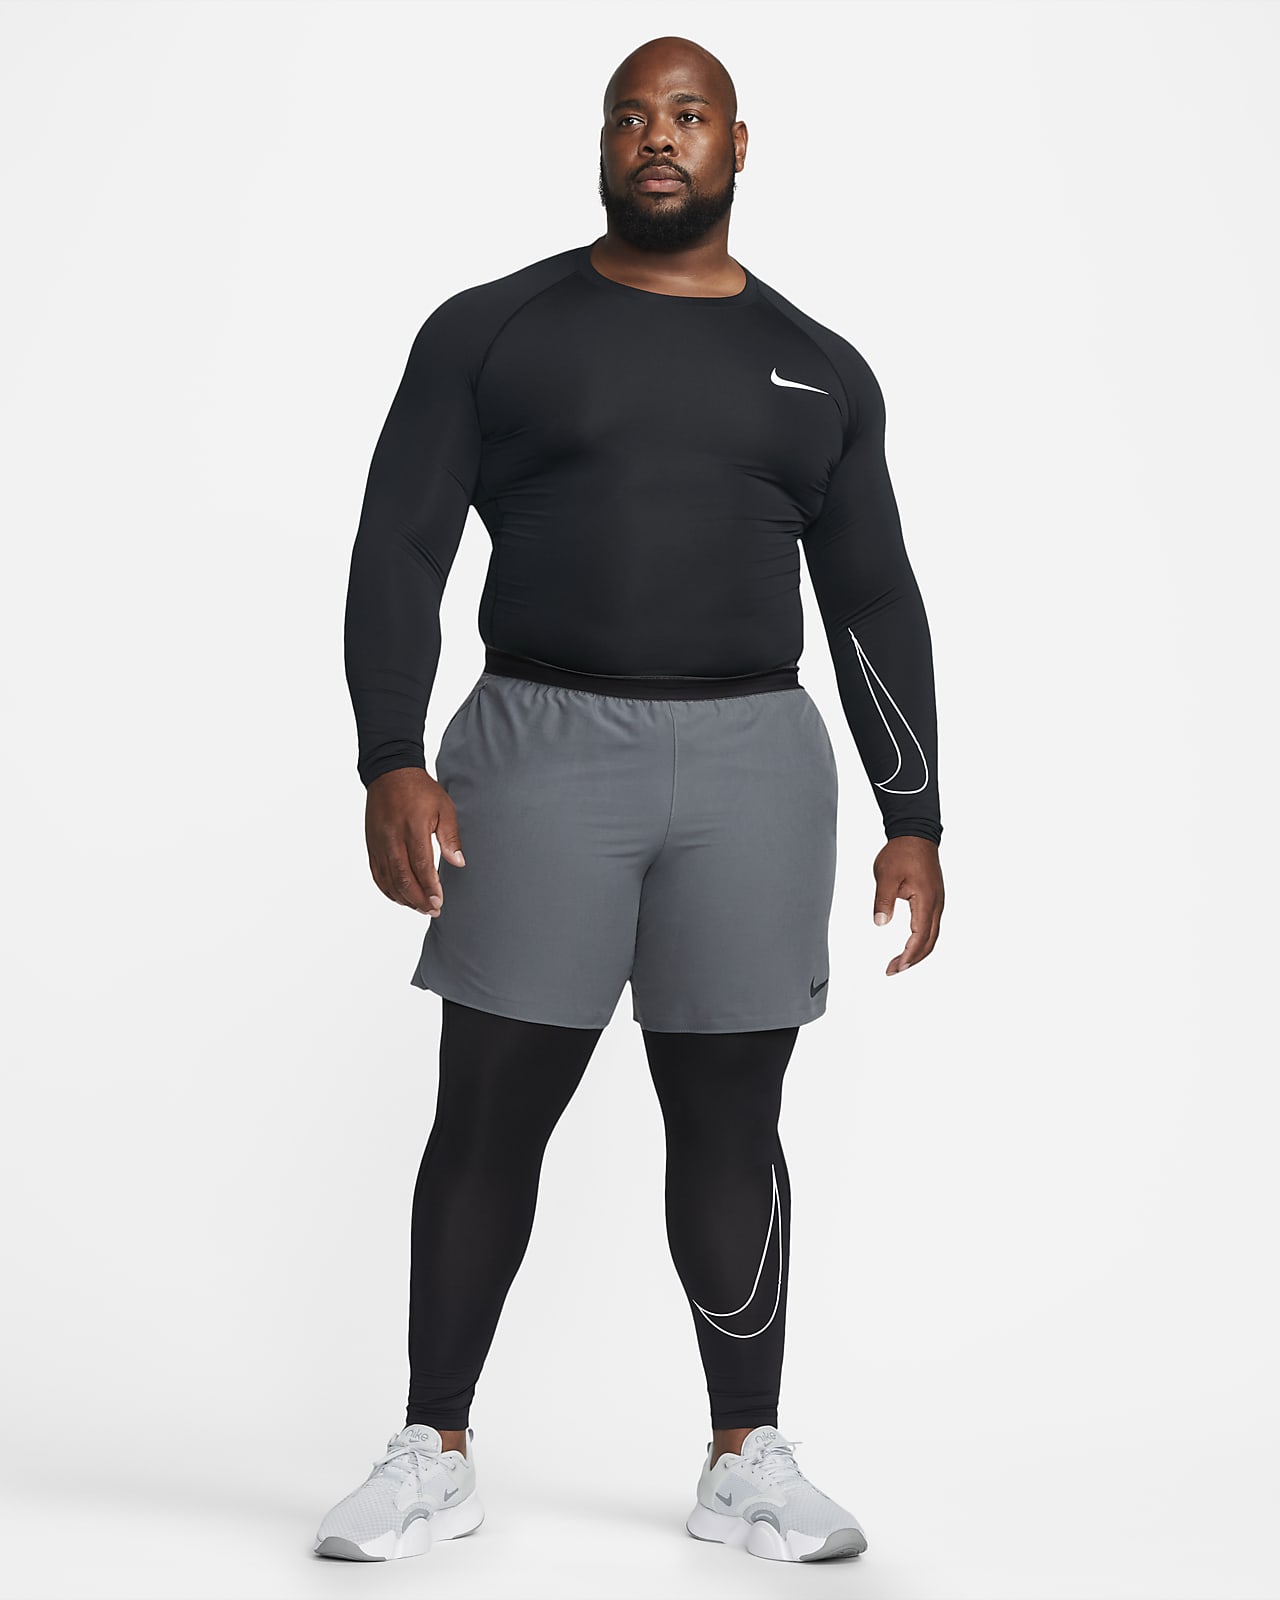 NIKE PRO DRI-FIT TIGHT-FIT LONG-SLEEVE TOP 'WHITE